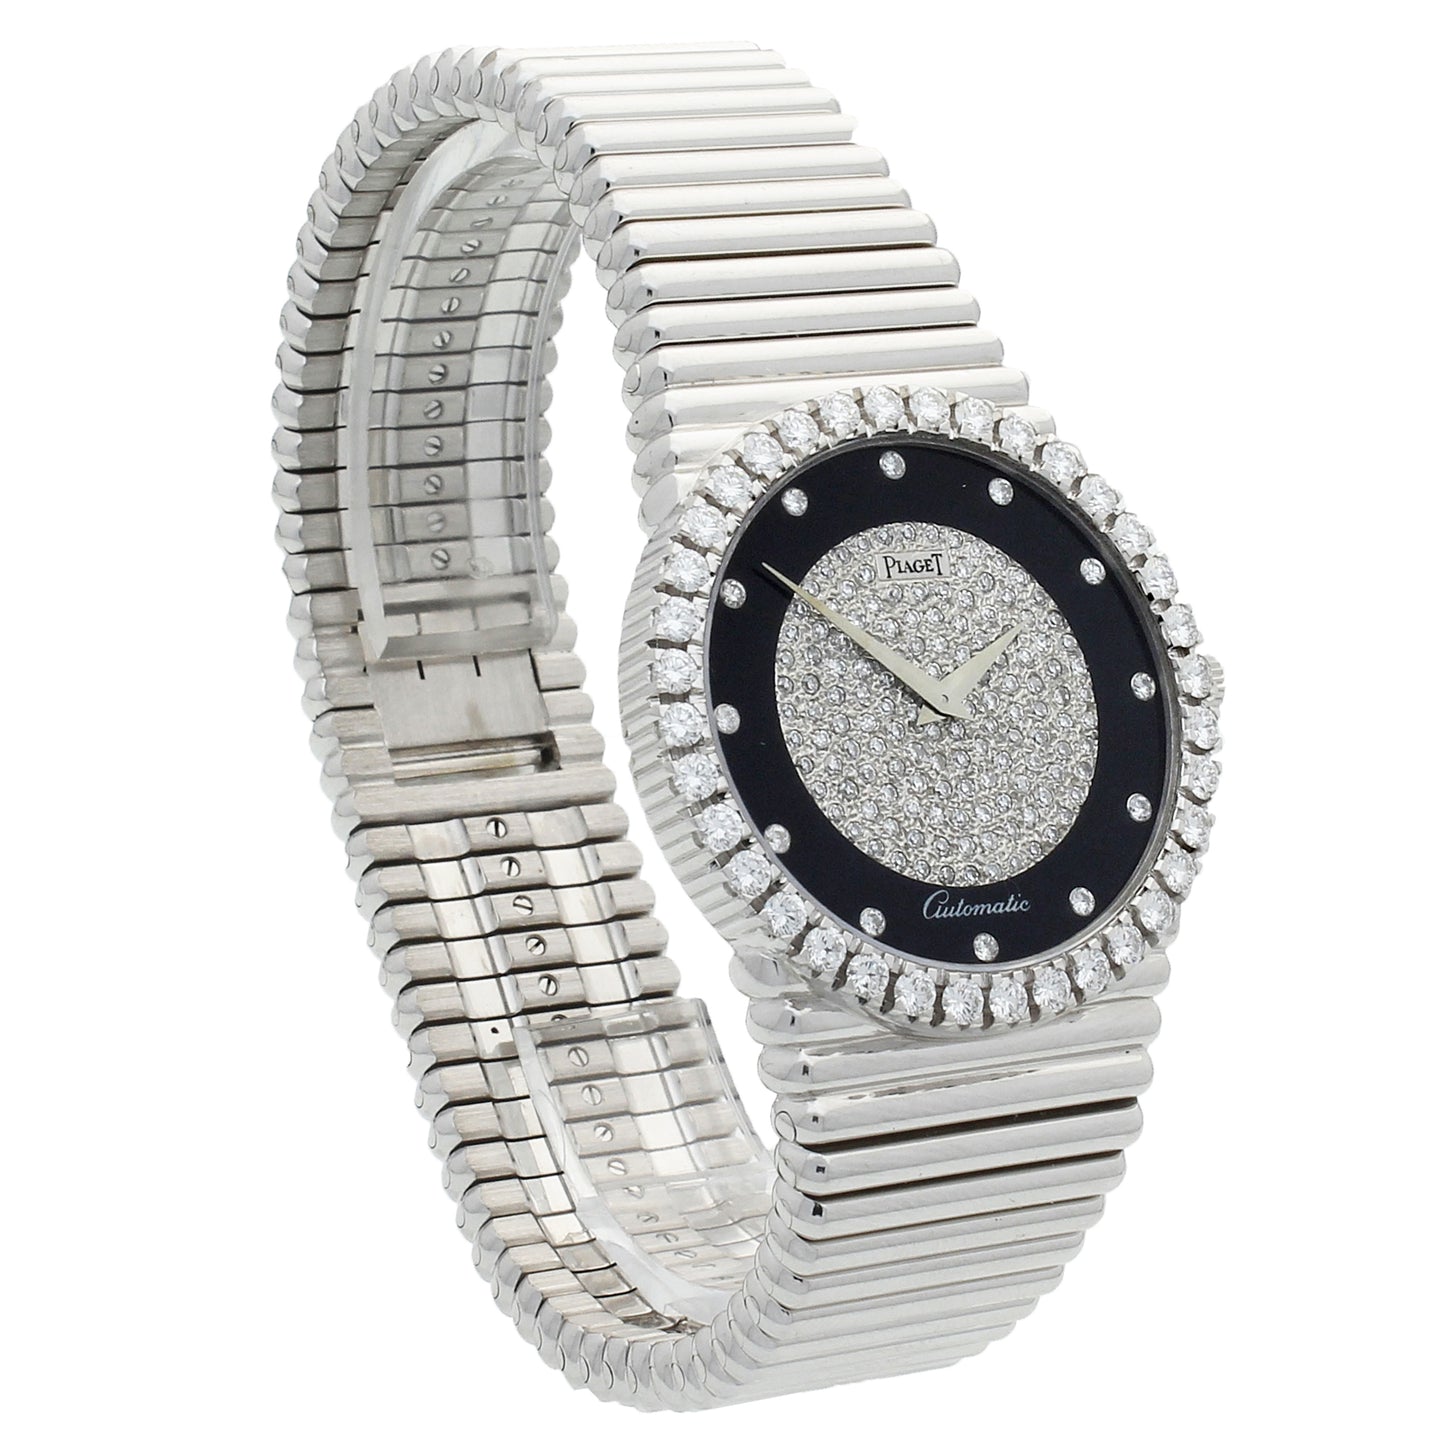 18ct white gold Piaget, reference 12336 bracelet watch with onyx and pavé diamond set dial and diamond set set bezel. Made 1970's